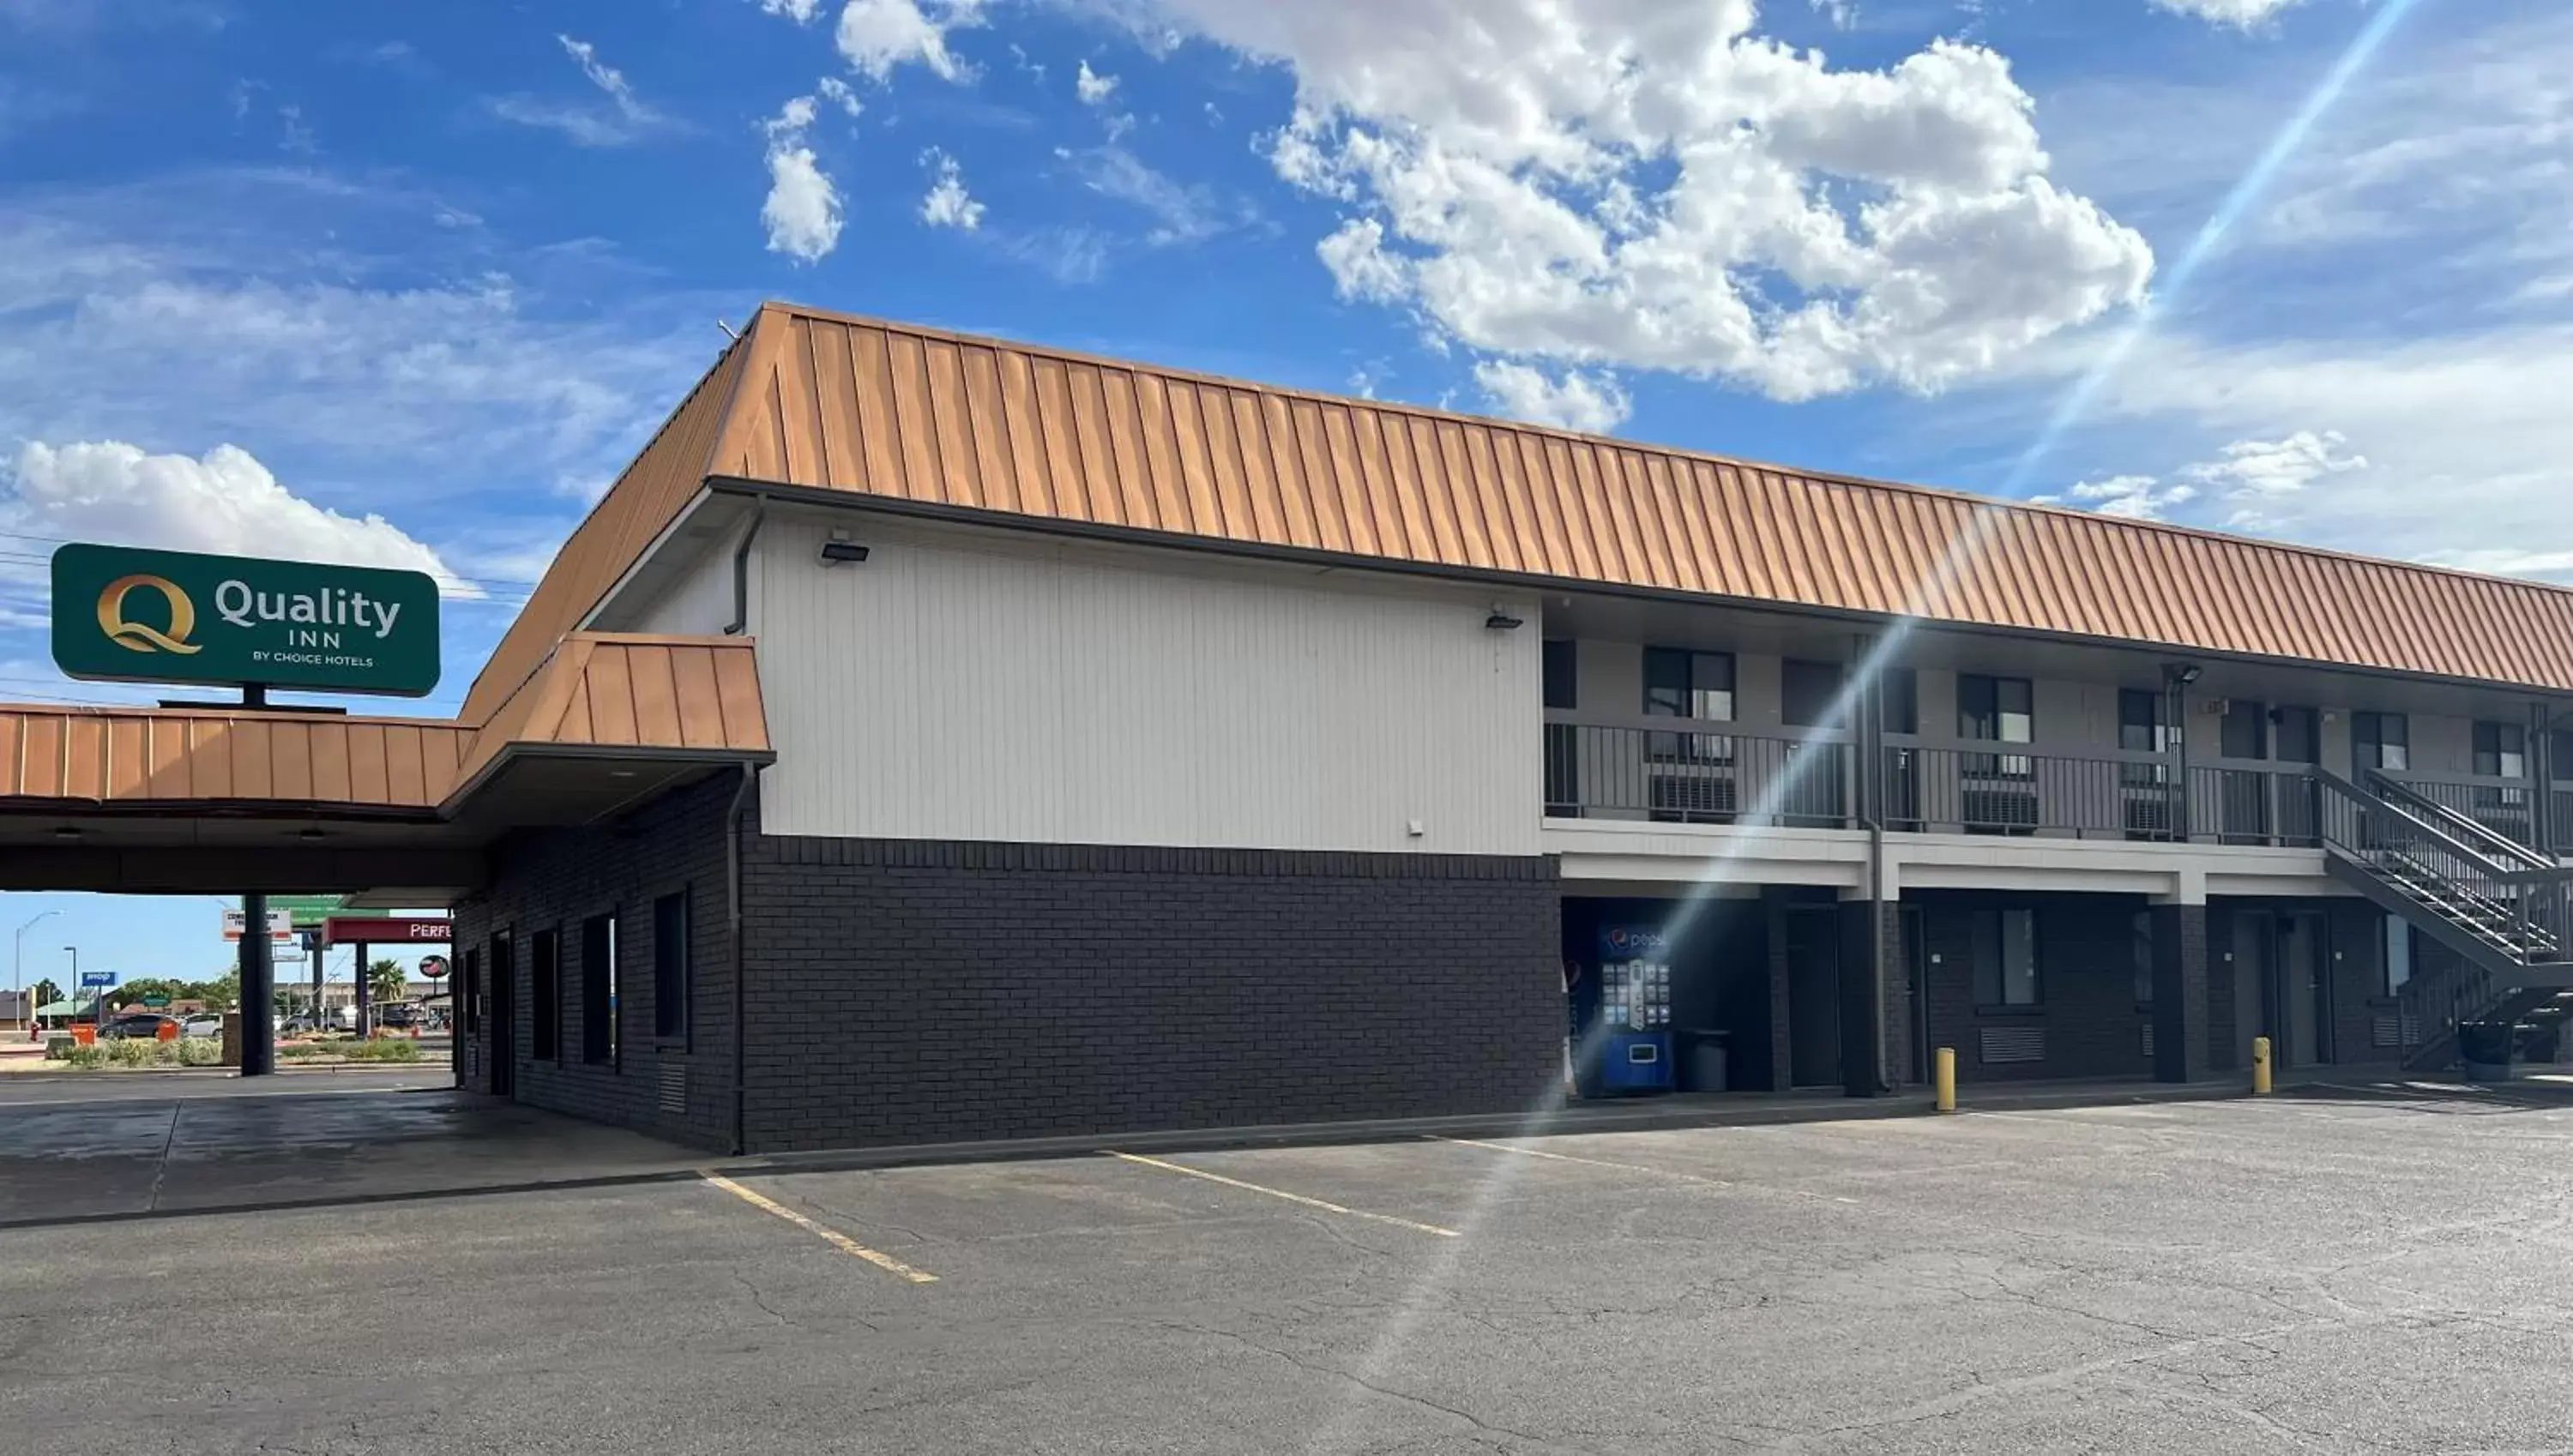 Property Building in Quality Inn & Suites Near White Sands National Park